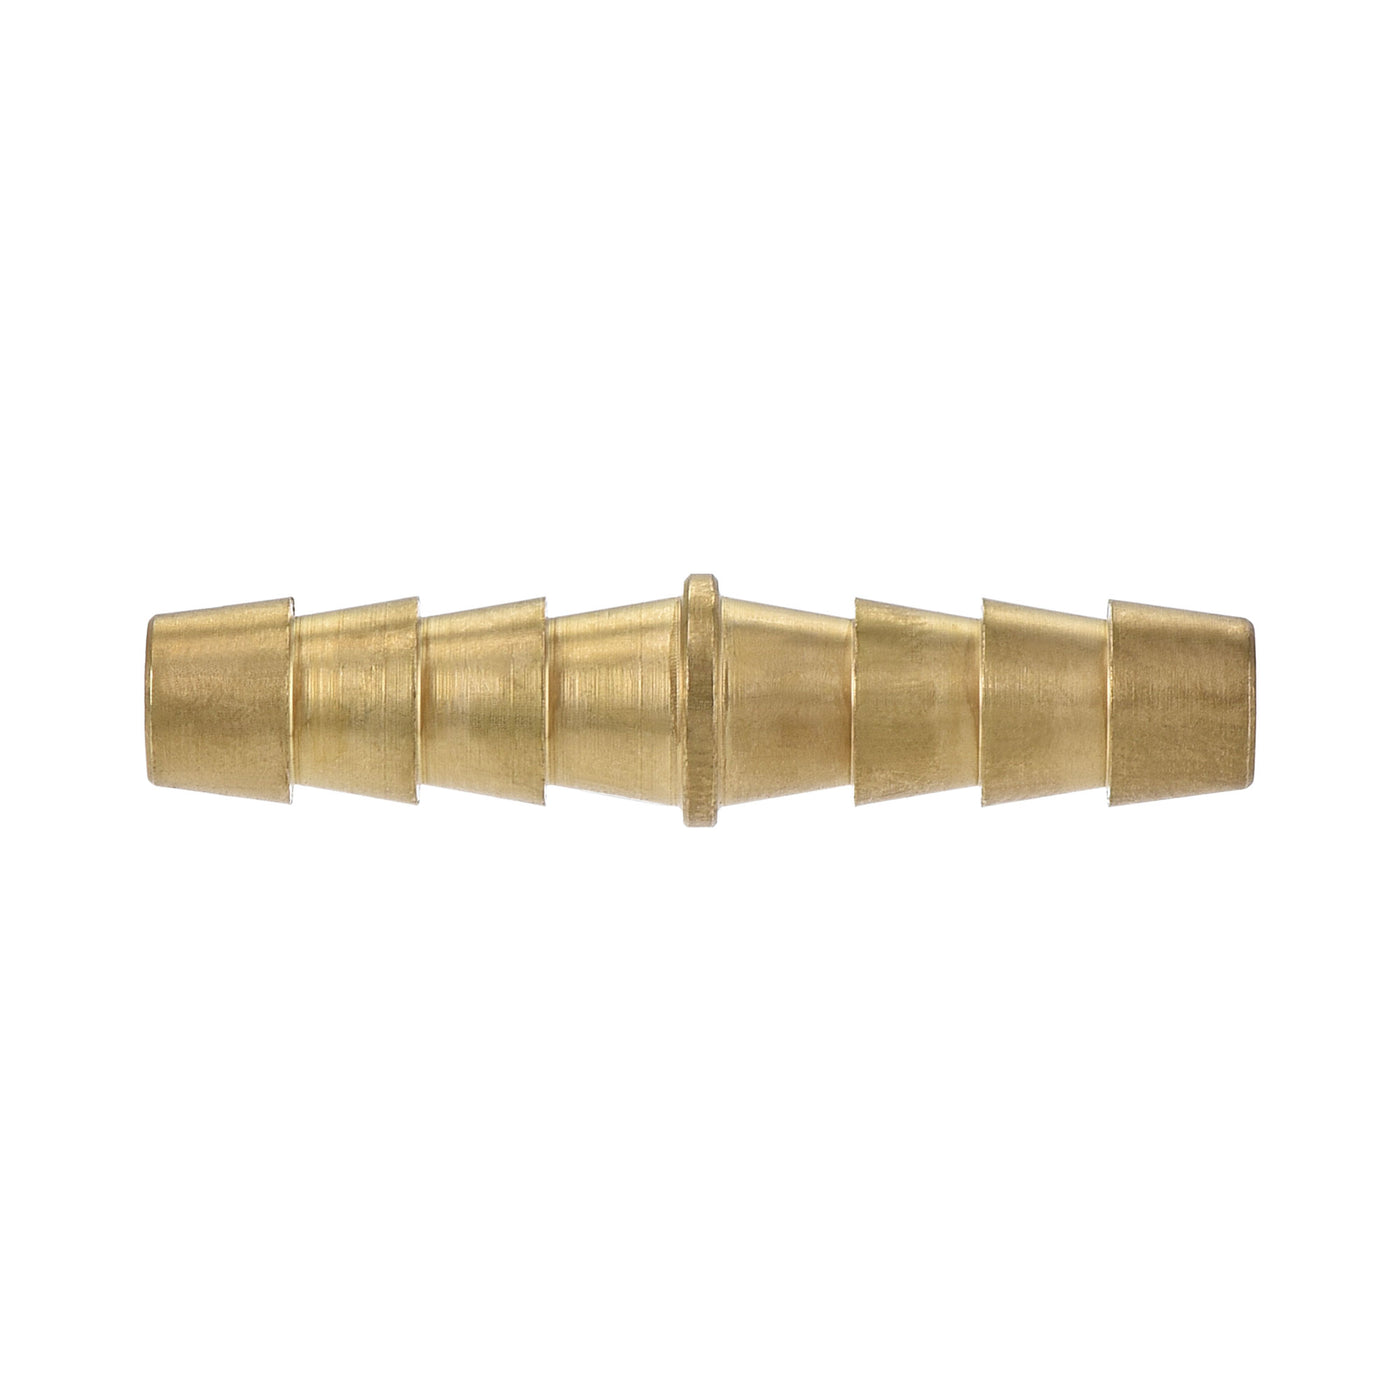 uxcell Uxcell Hose Barb Fitting, 1/4x1/4inch Brass Hollow Straight Quick Connector for Water Fuel Air Oil Gas, Pack of 2